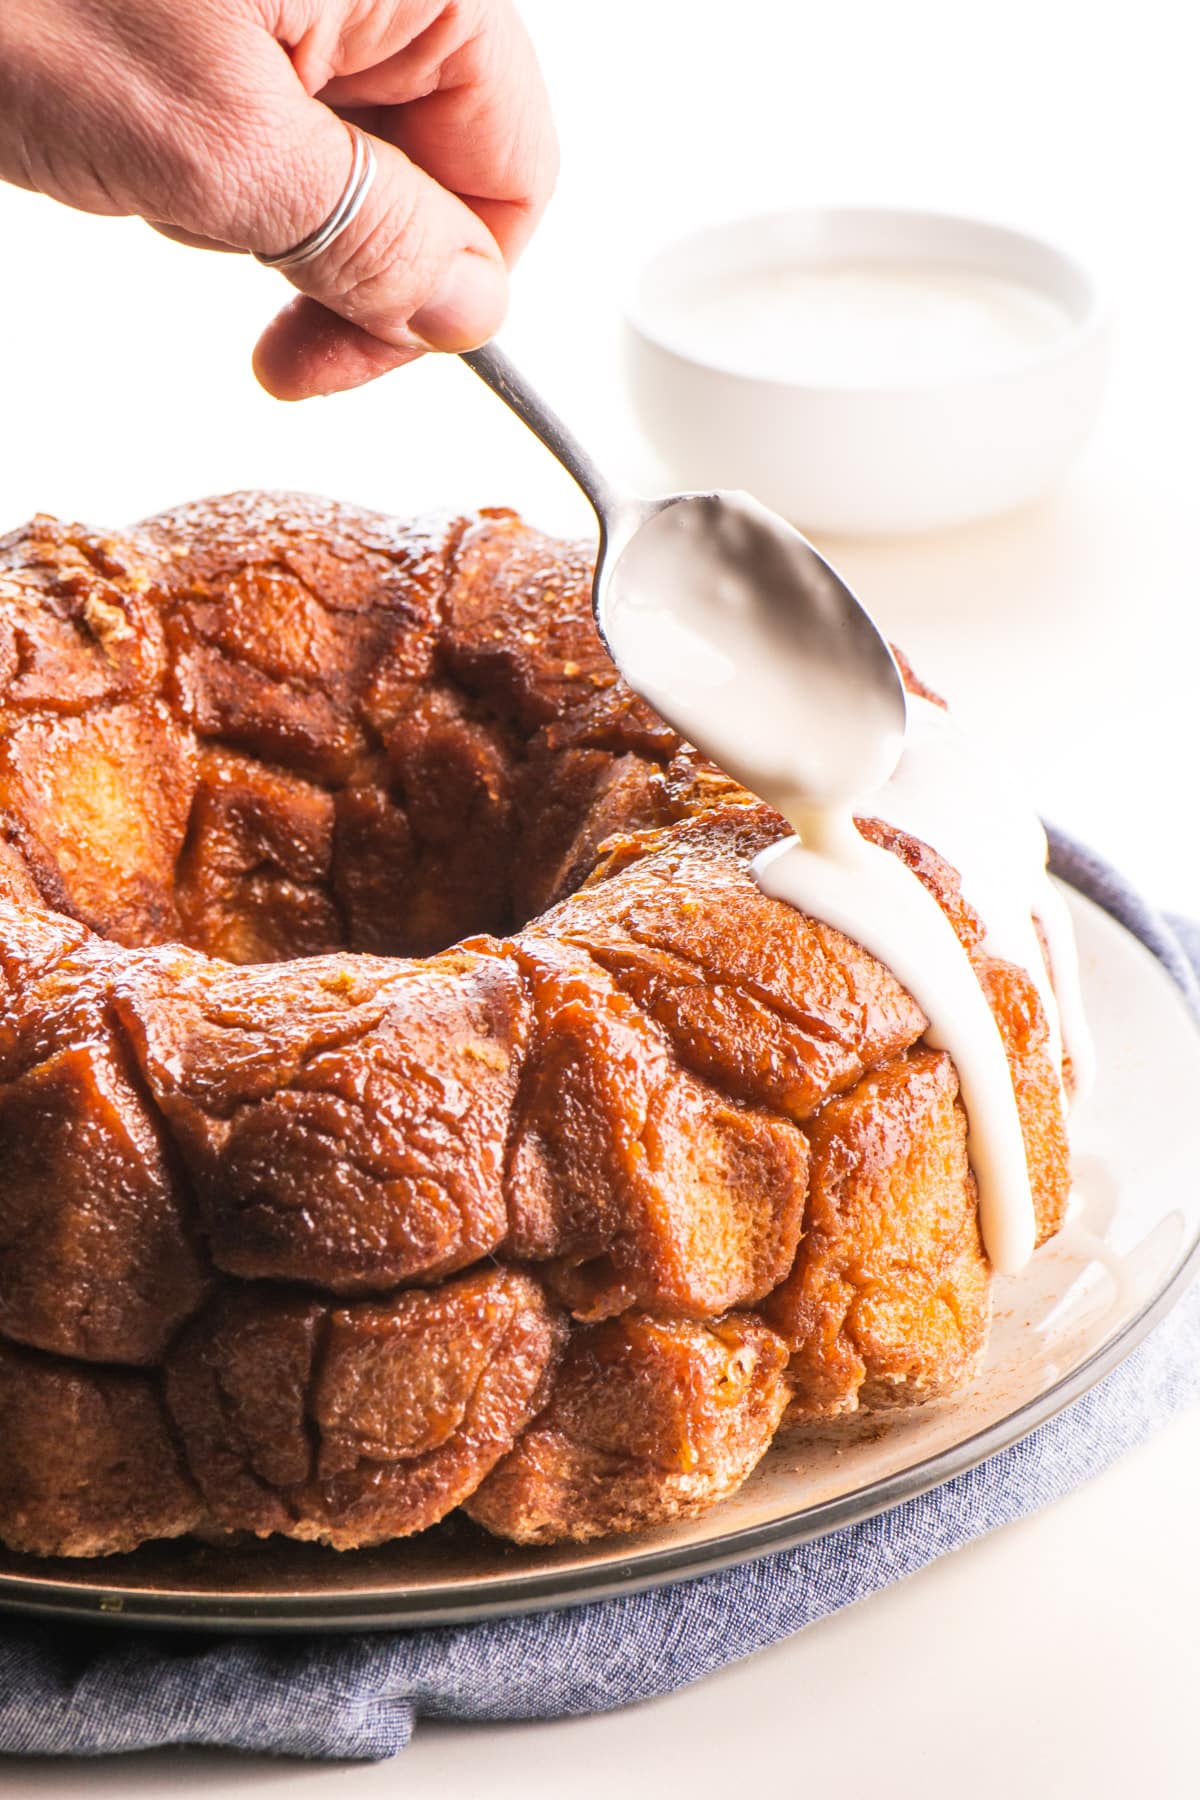 A spoon is full of white icing and is drizzling it over vegan monkey bread.